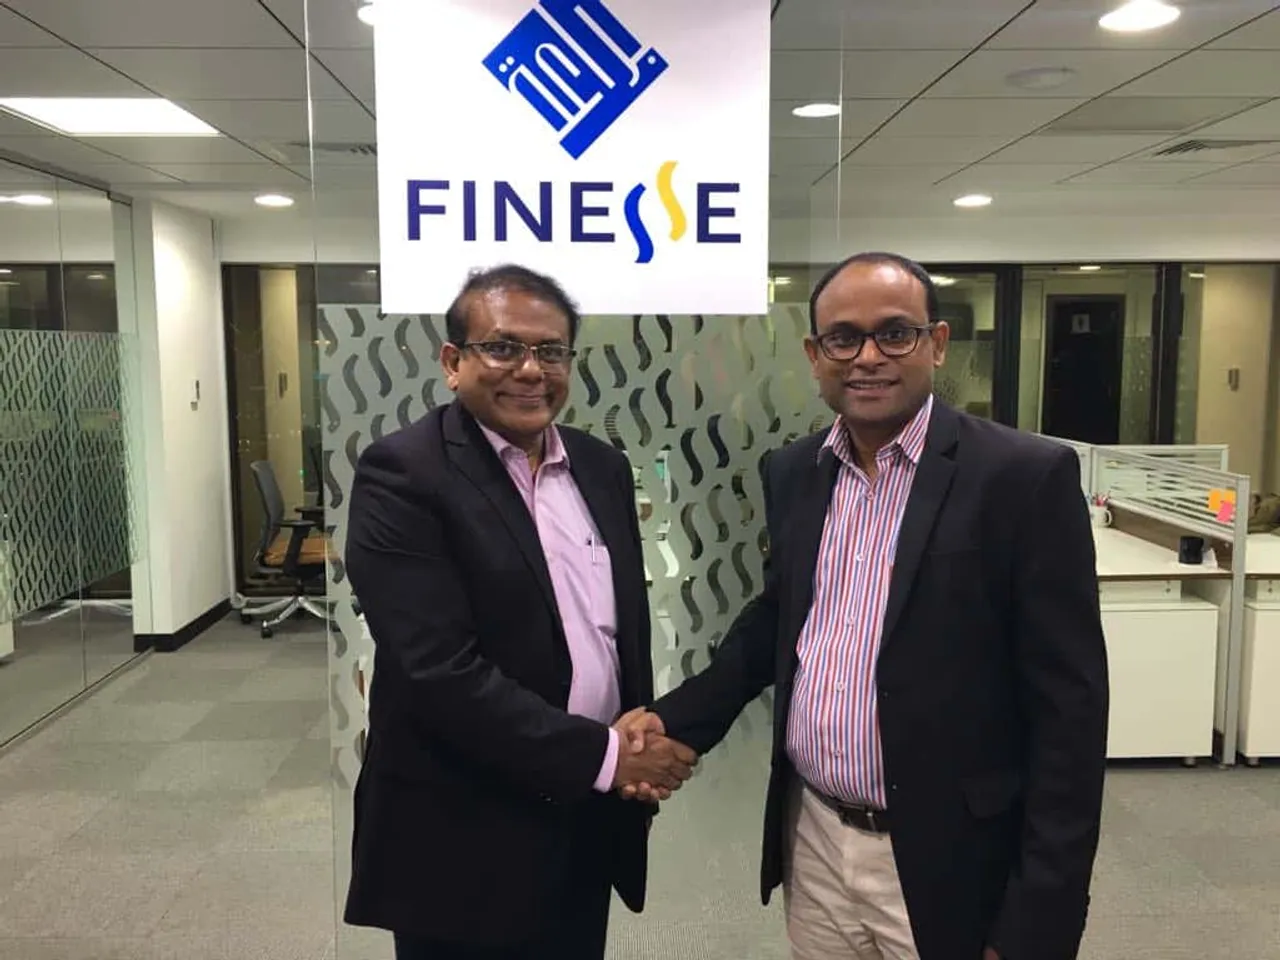 Finesse Partners with Image InfoSystems to Implement VAT Systems for Enterprises